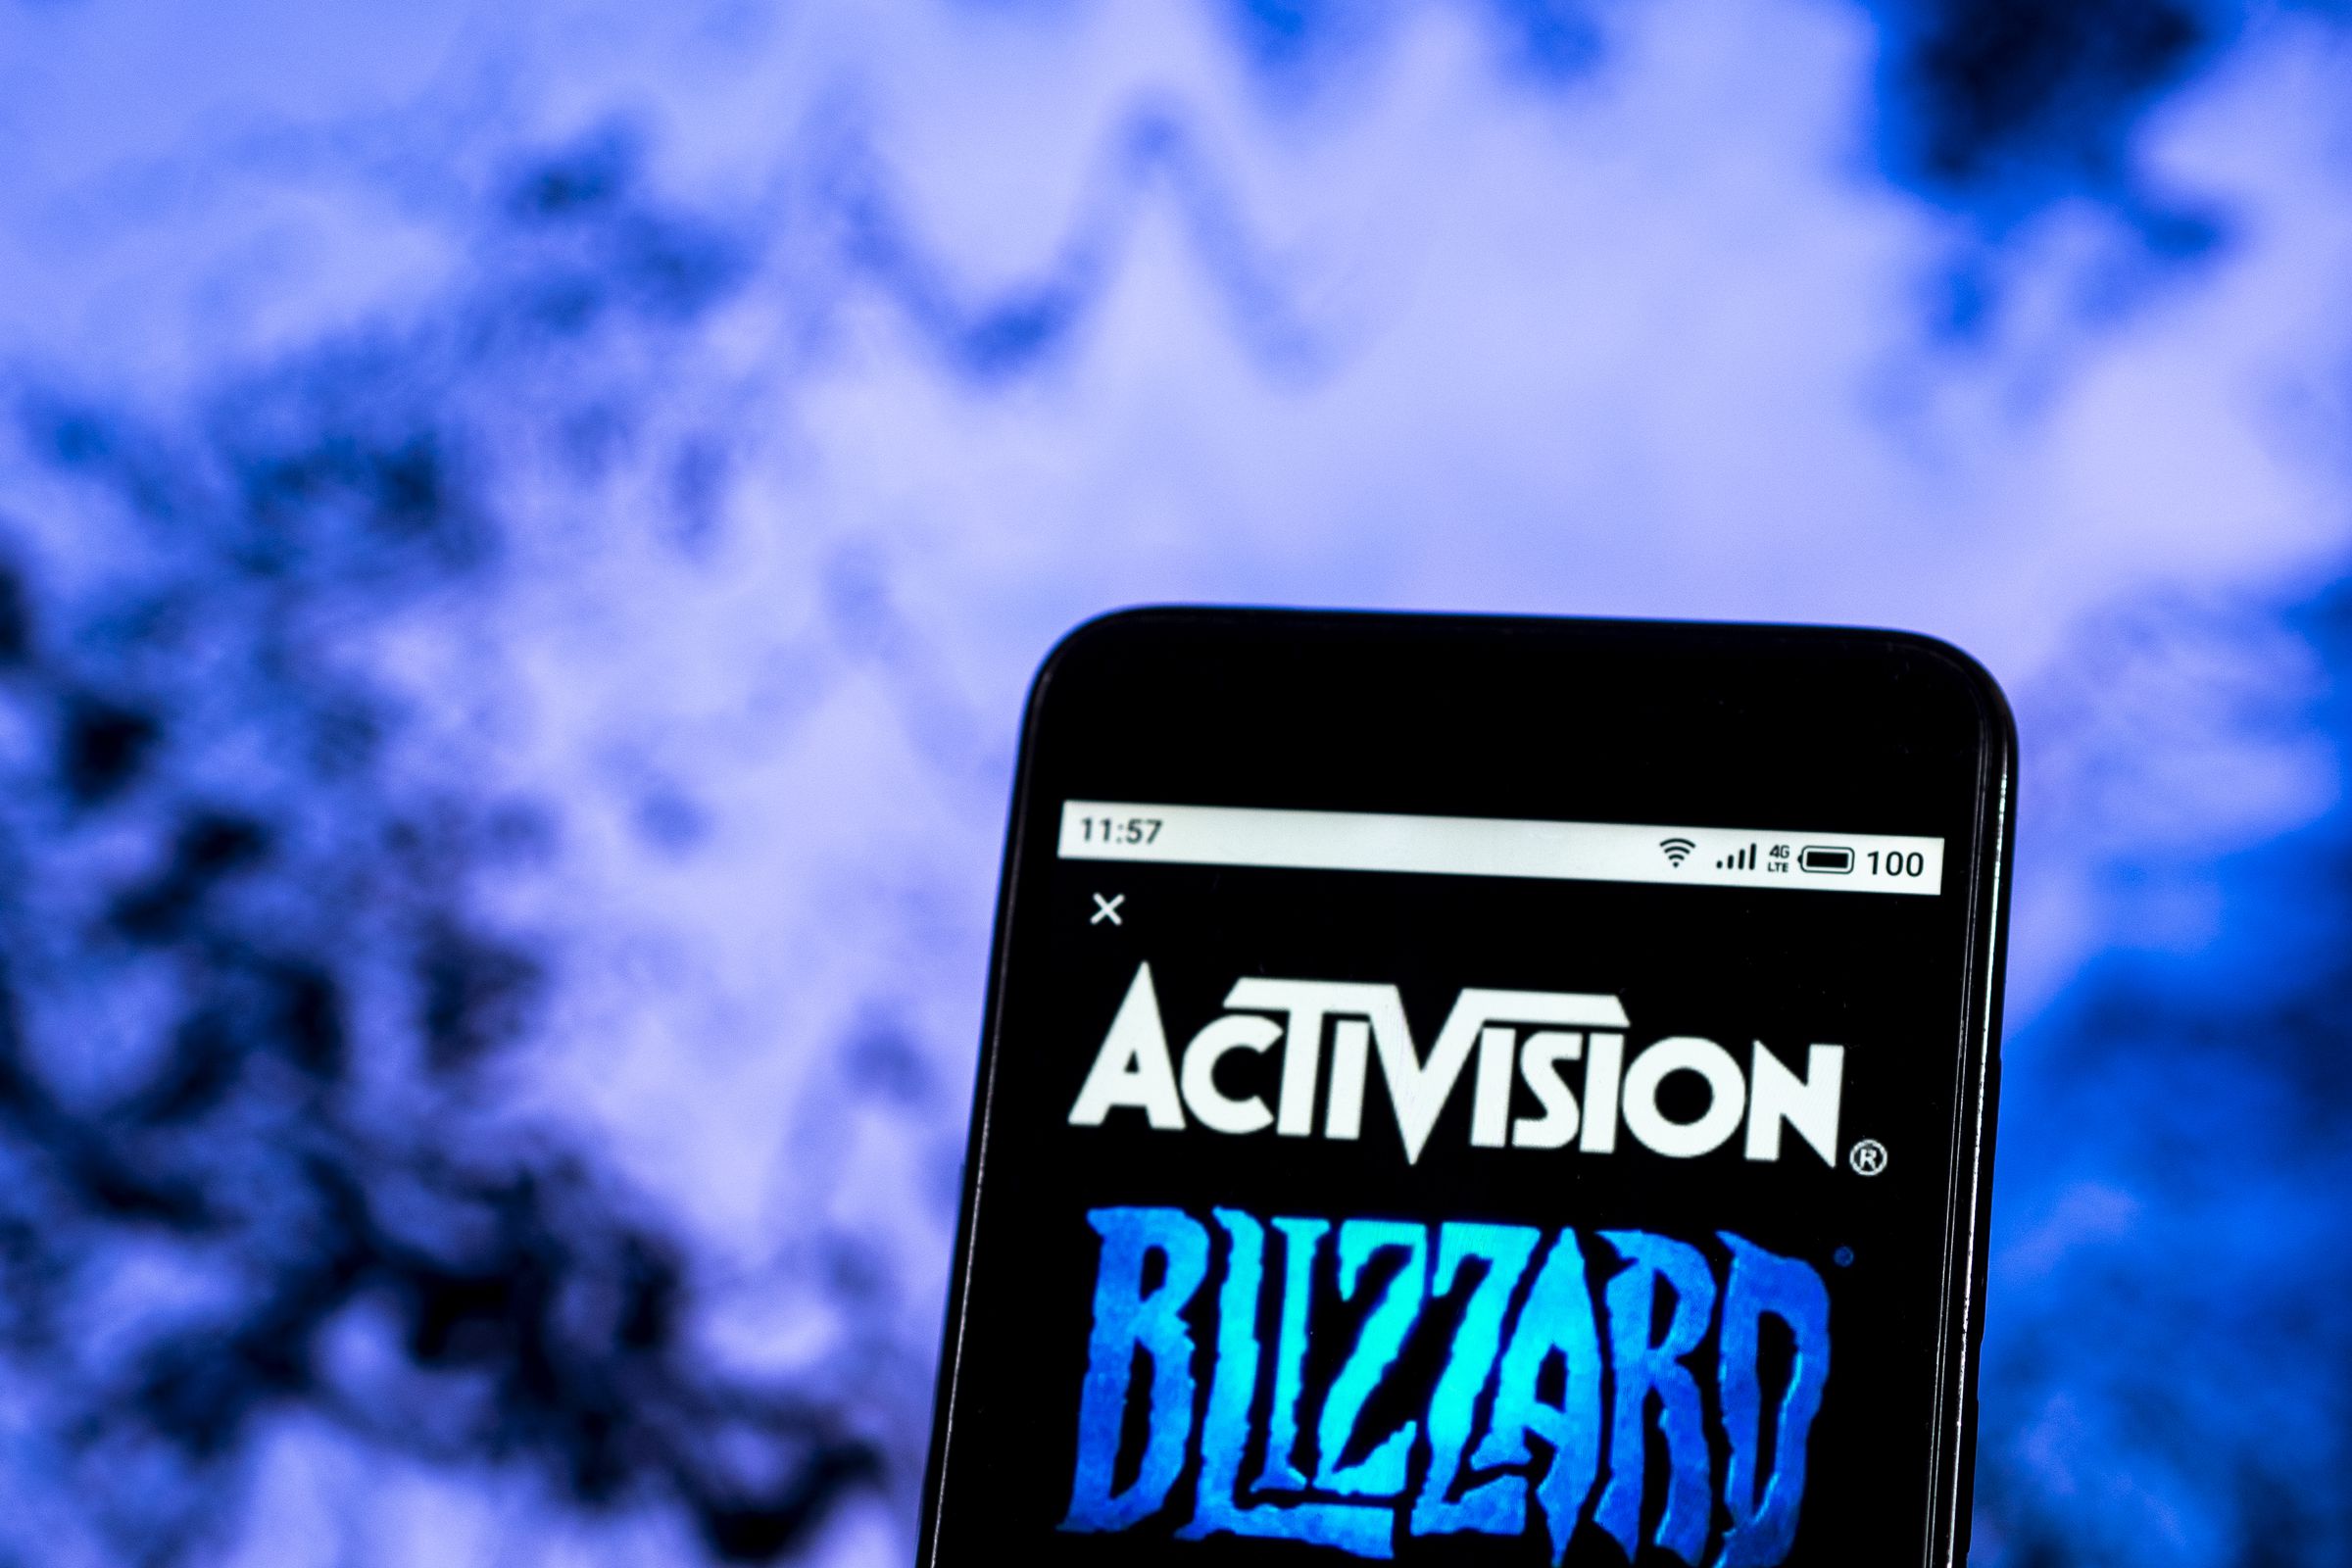 Activision Blizzard Video game company logo seen displayed